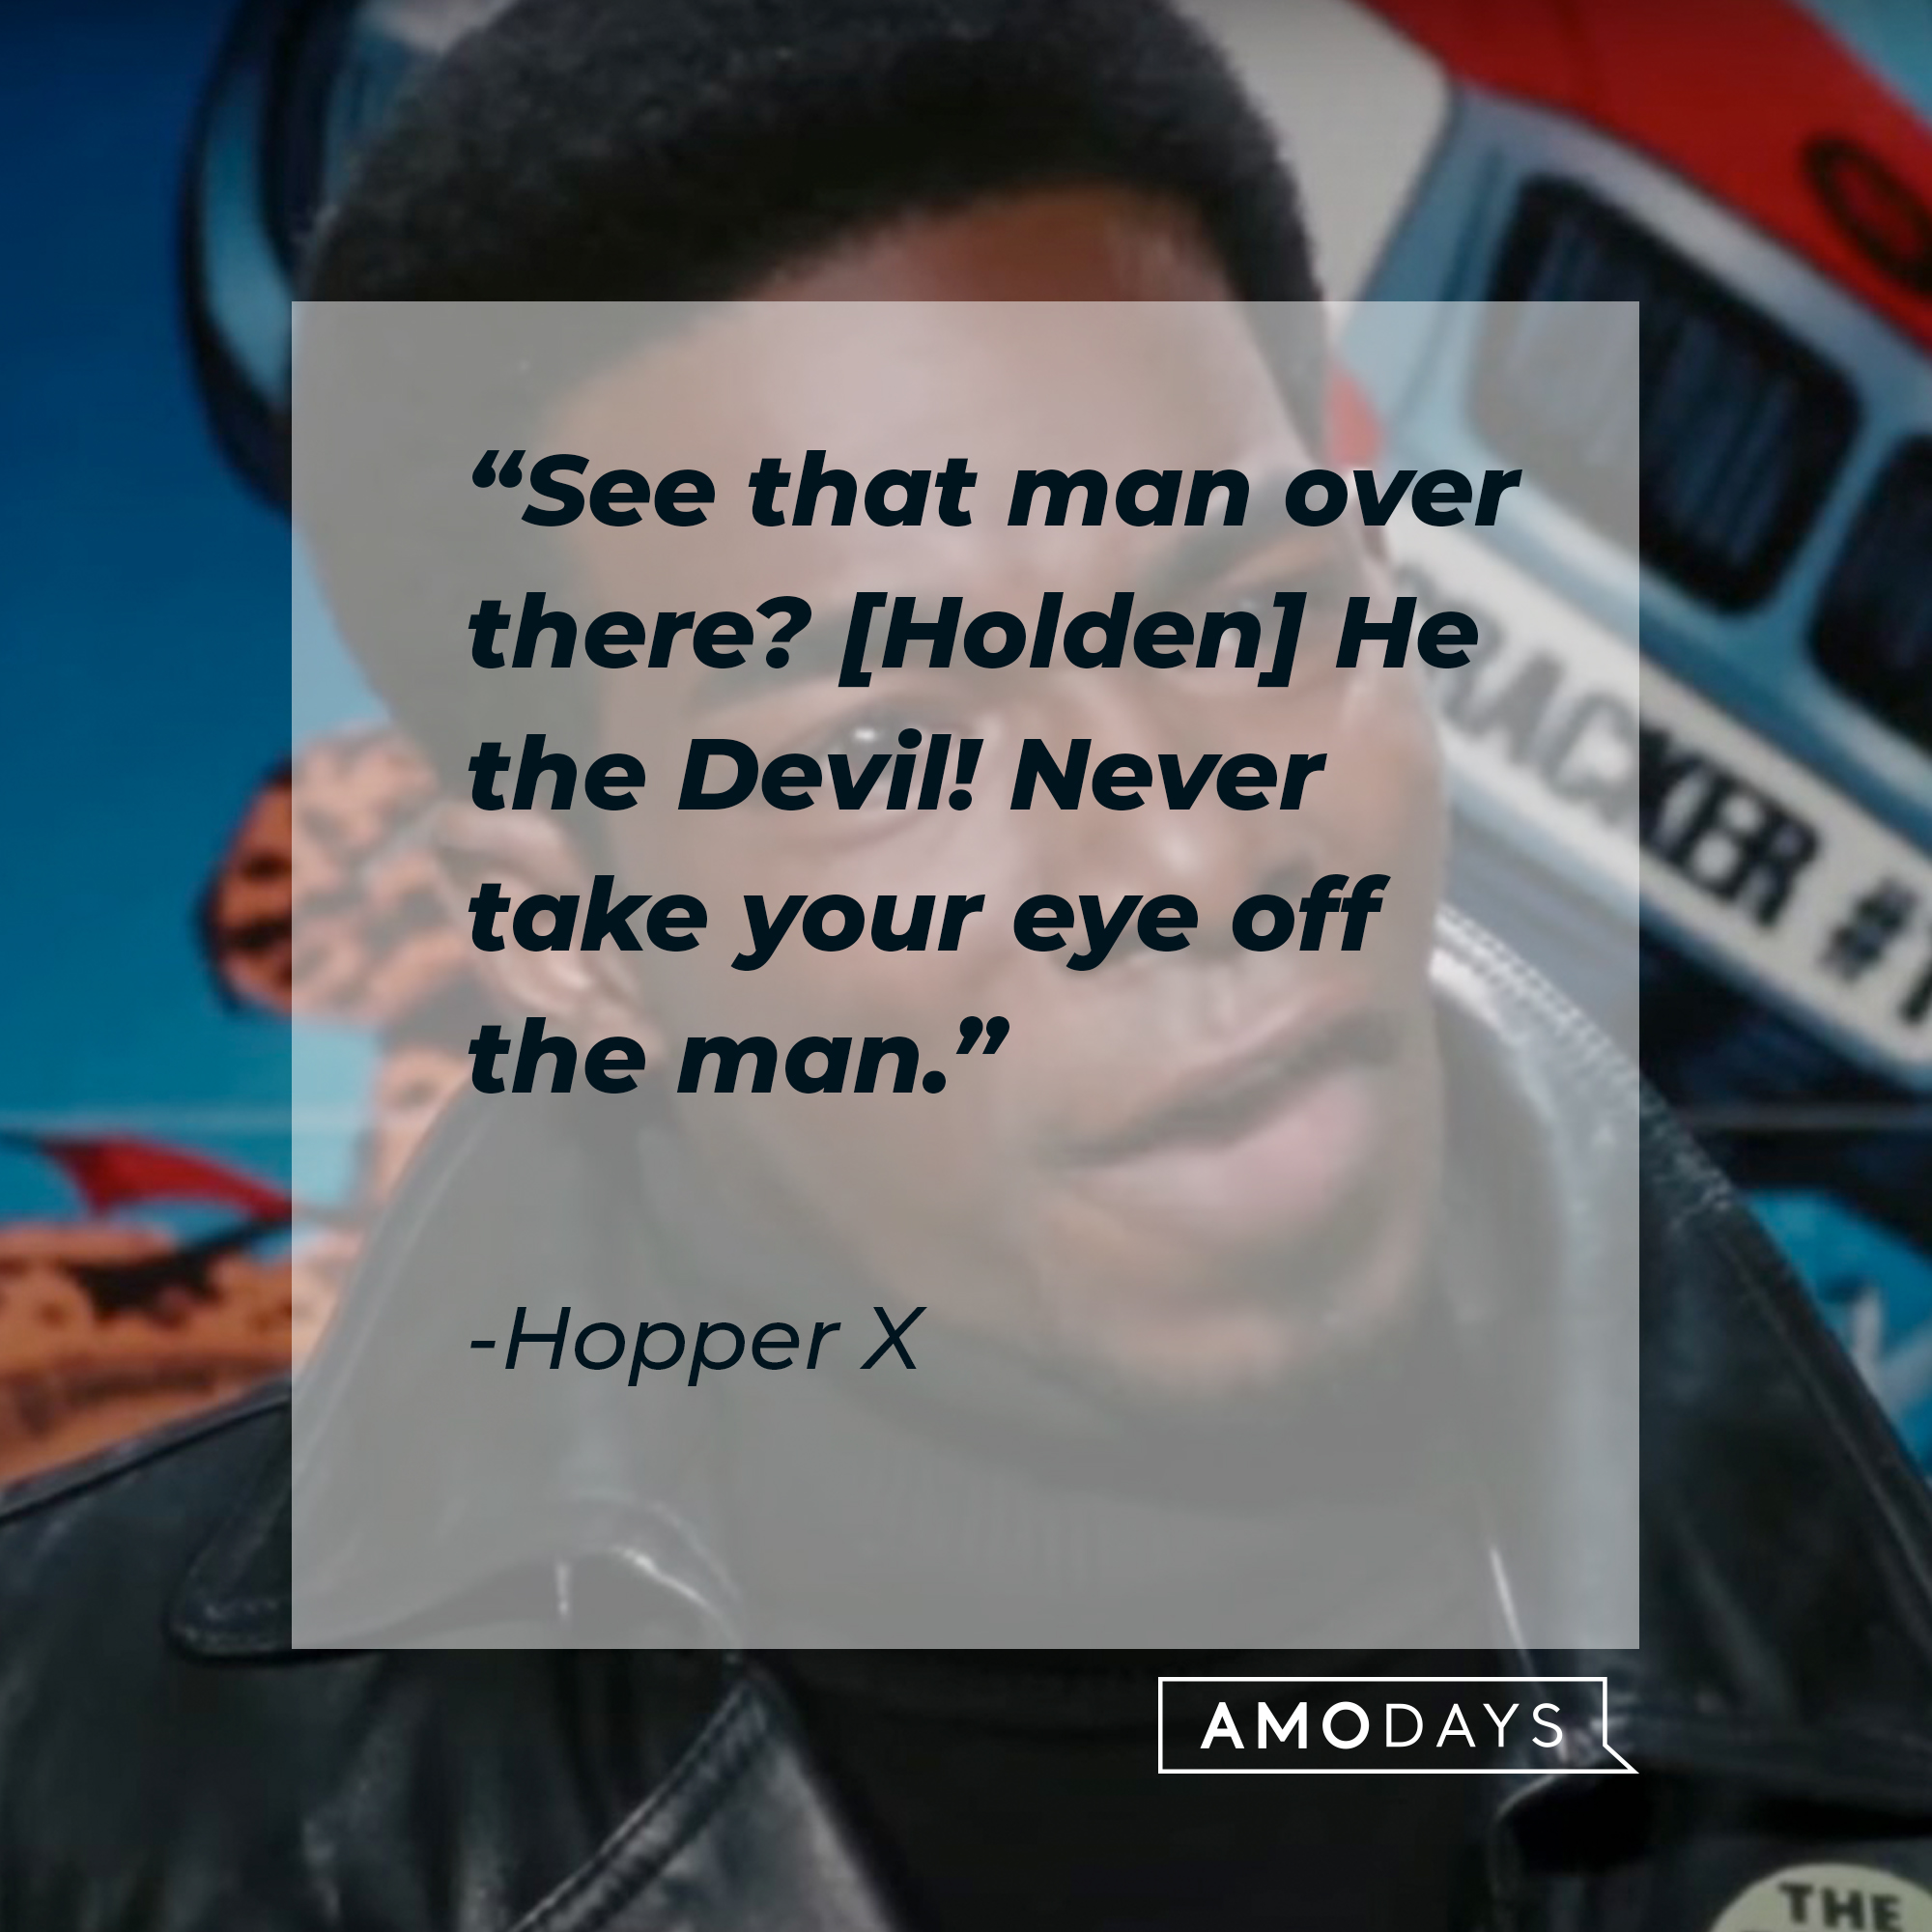 Hopper X, with his quote: “See that man over there? [Holden] He the Devil! Never take your eye off the man.” | Source: facebook.com/ChasingAmyMov